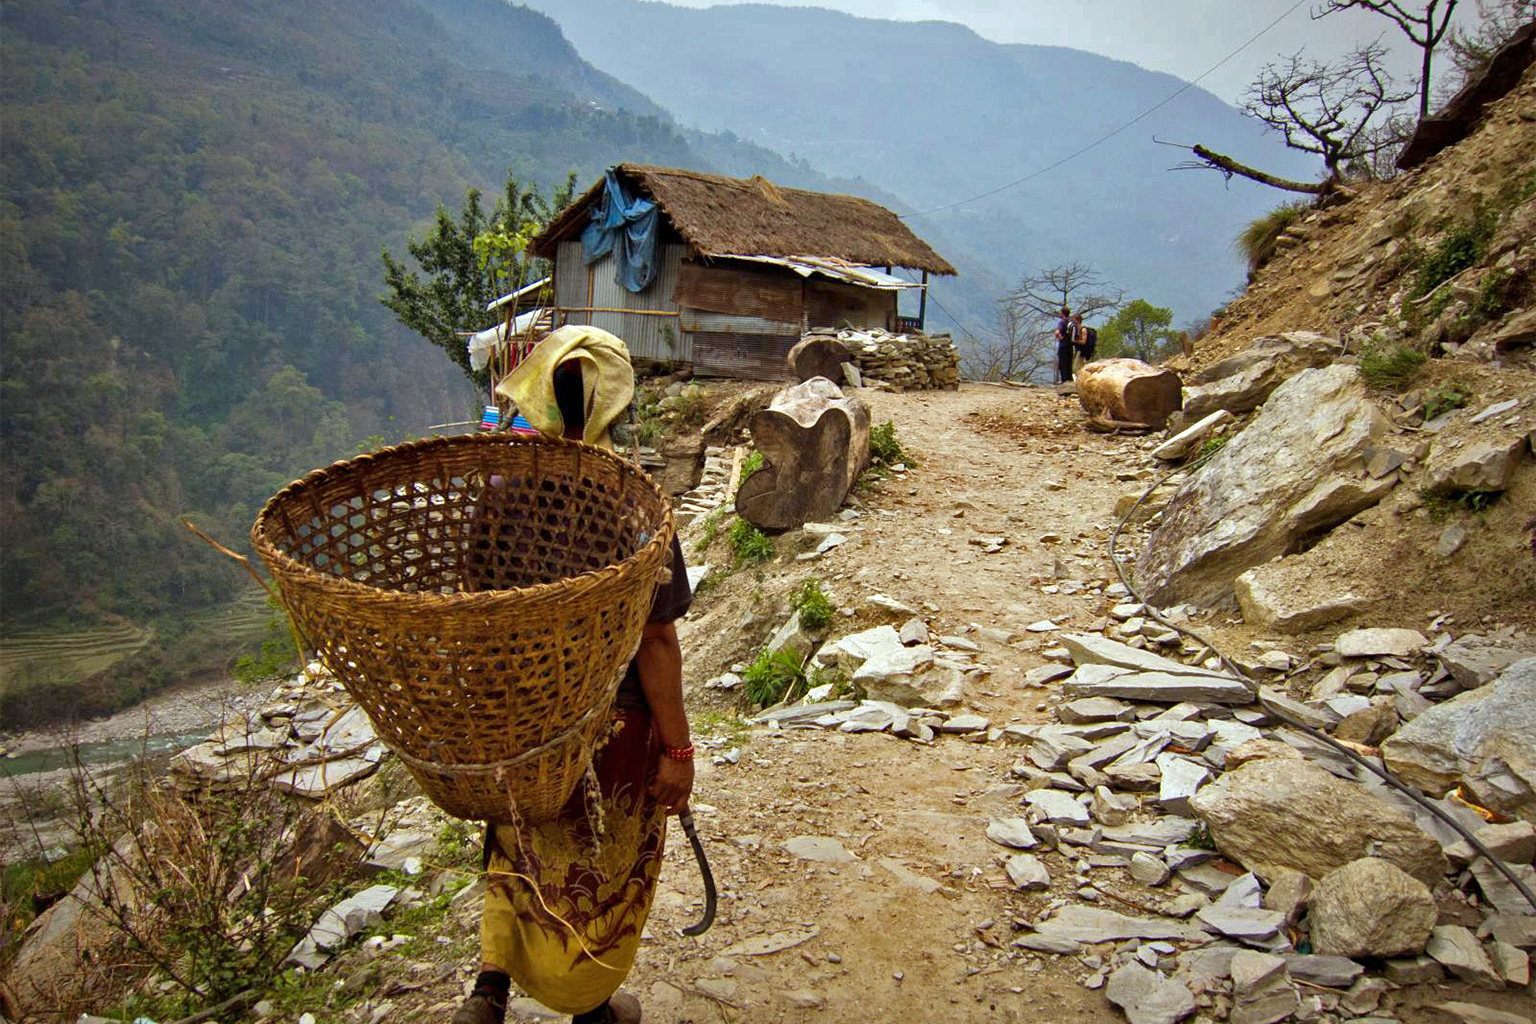 A local woman in the Annapurna Conservation Area.